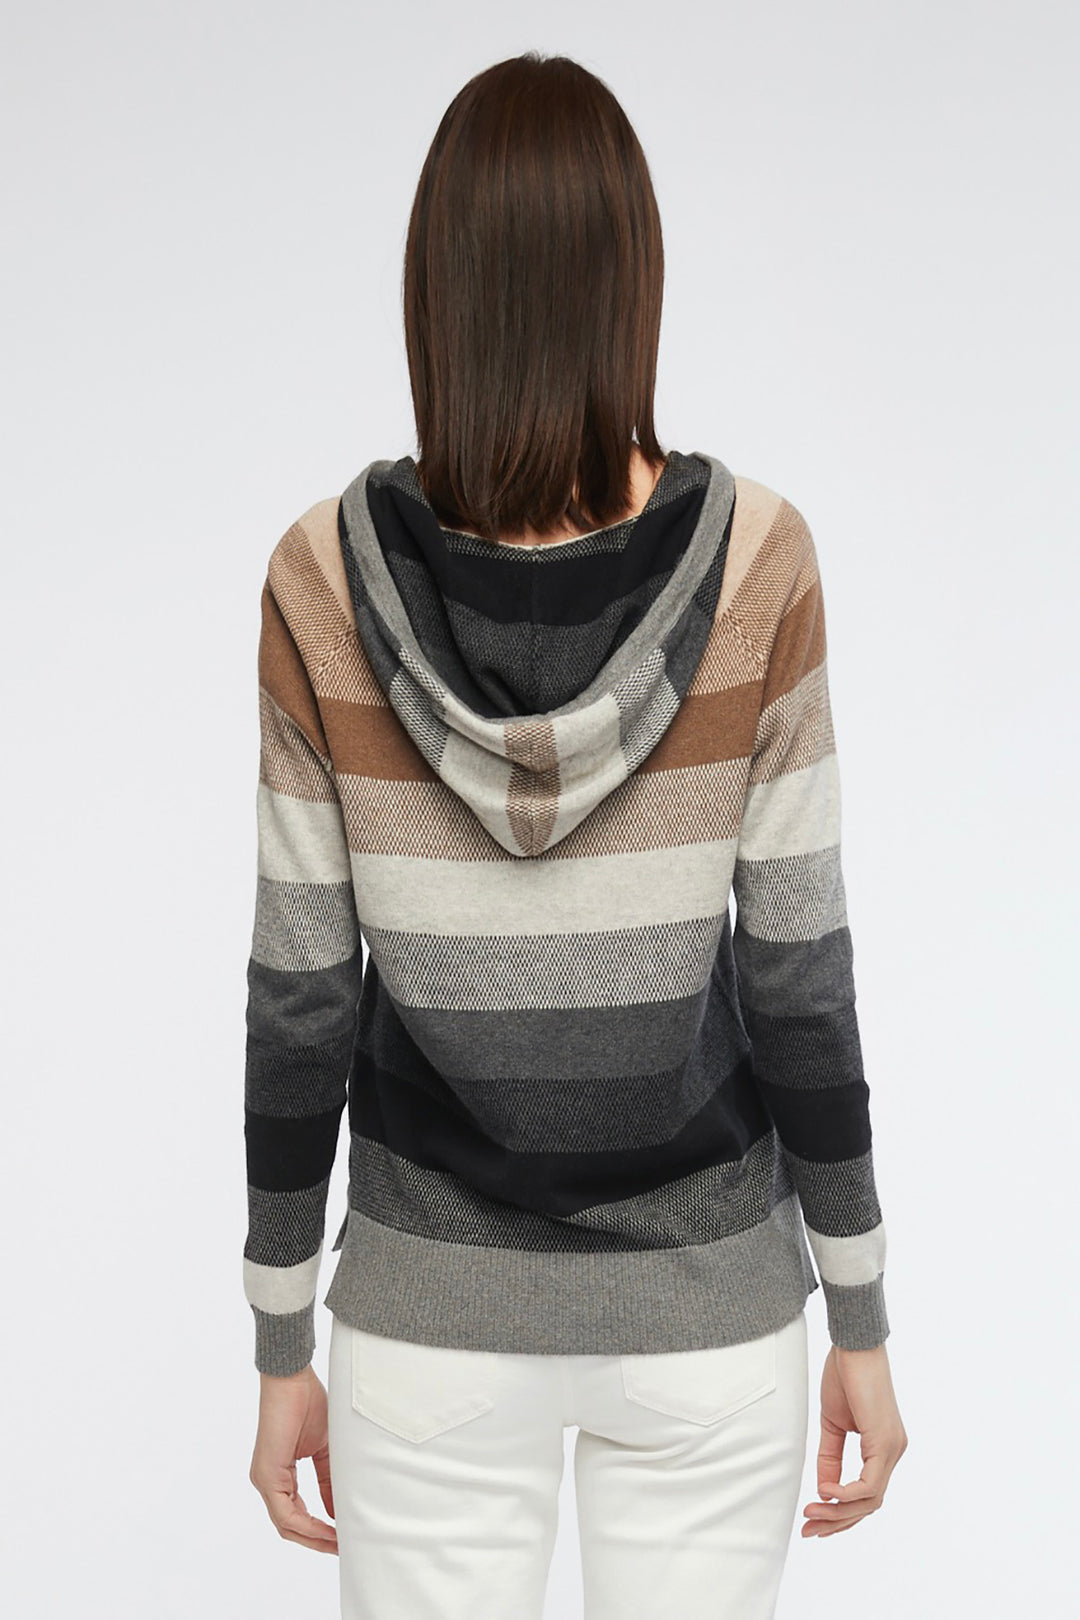 splice clouds hoodie by Zaket & Plover back view